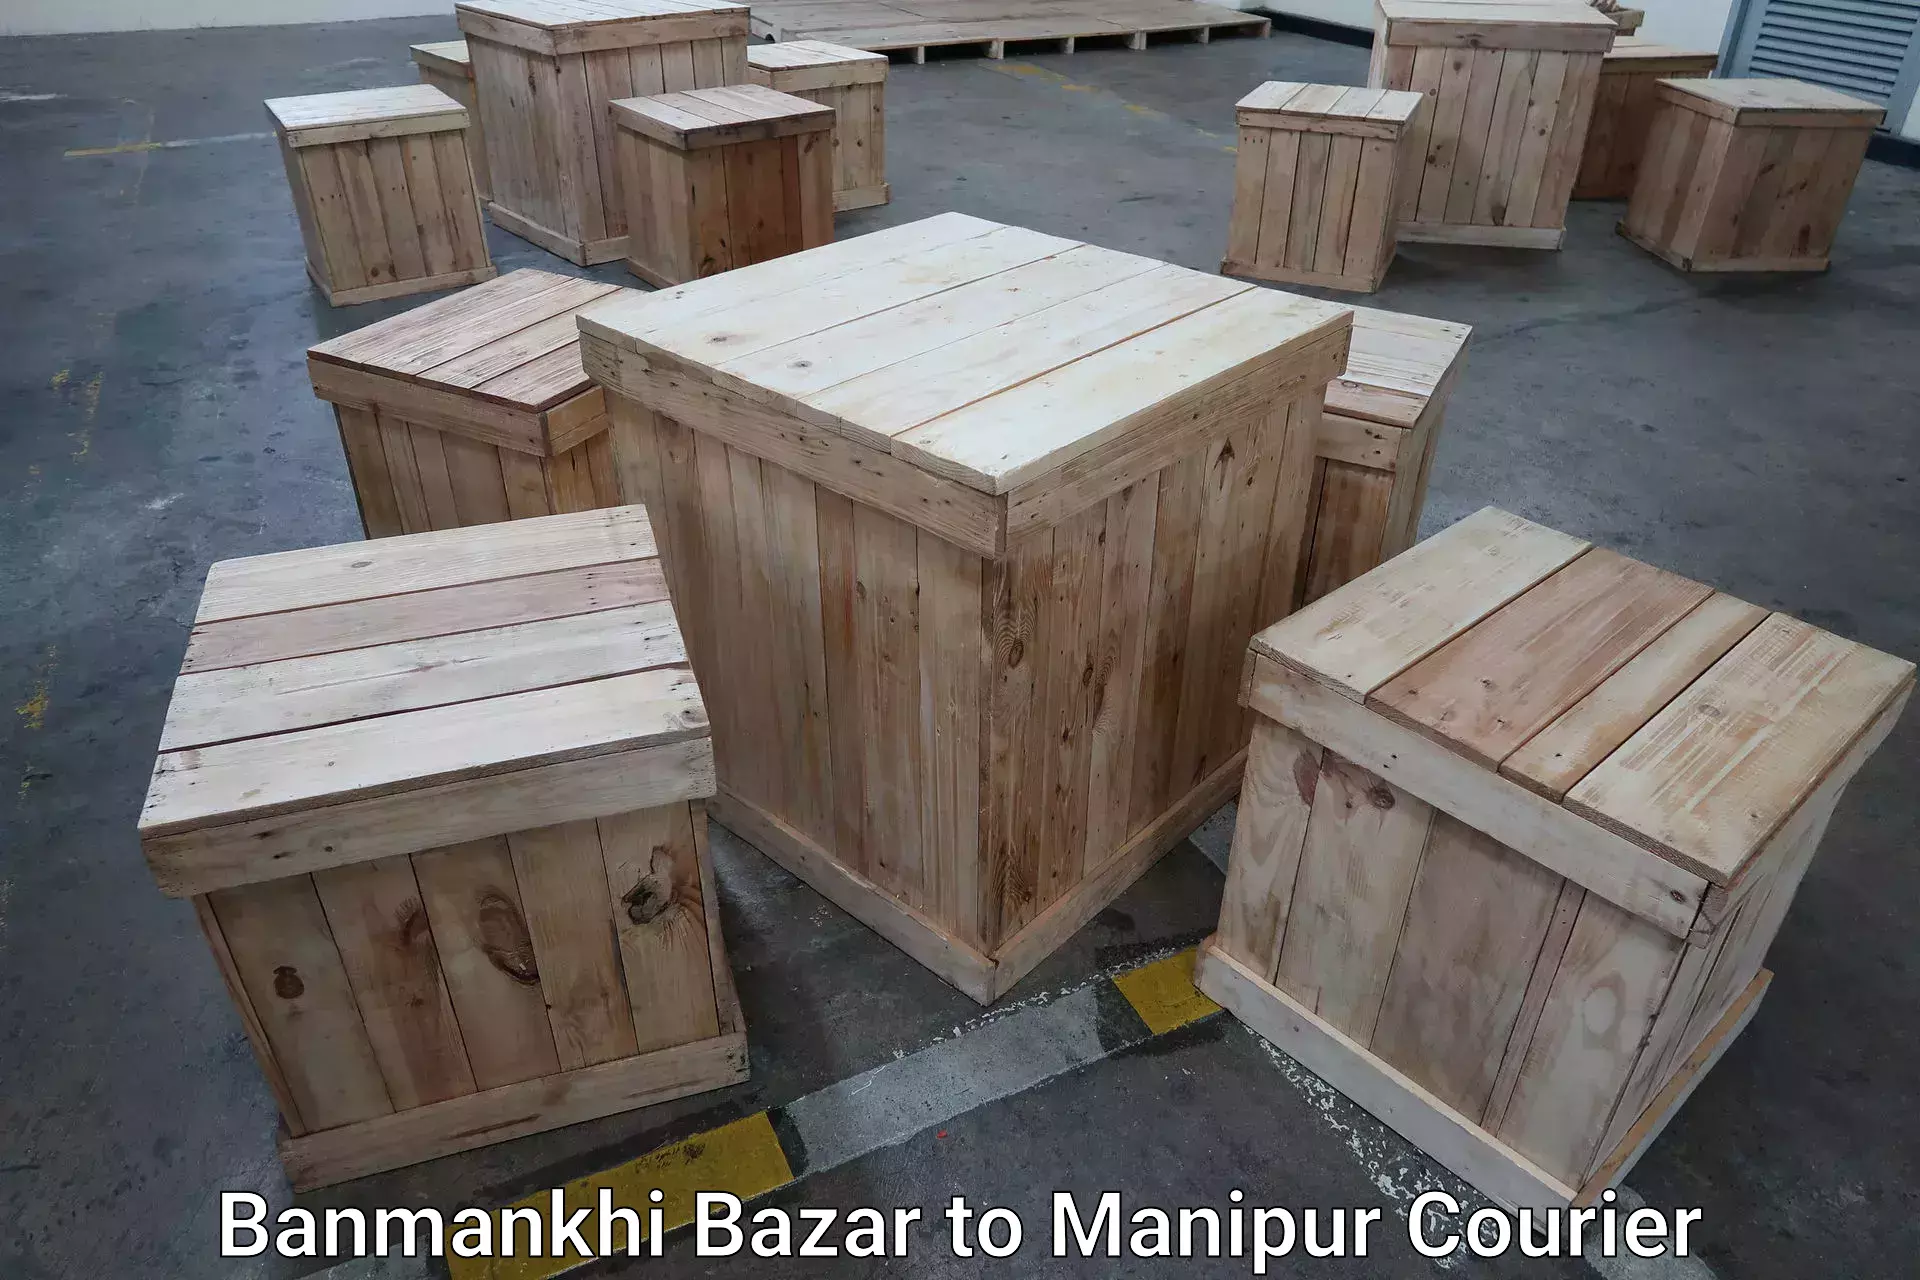 Baggage shipping experience Banmankhi Bazar to Manipur